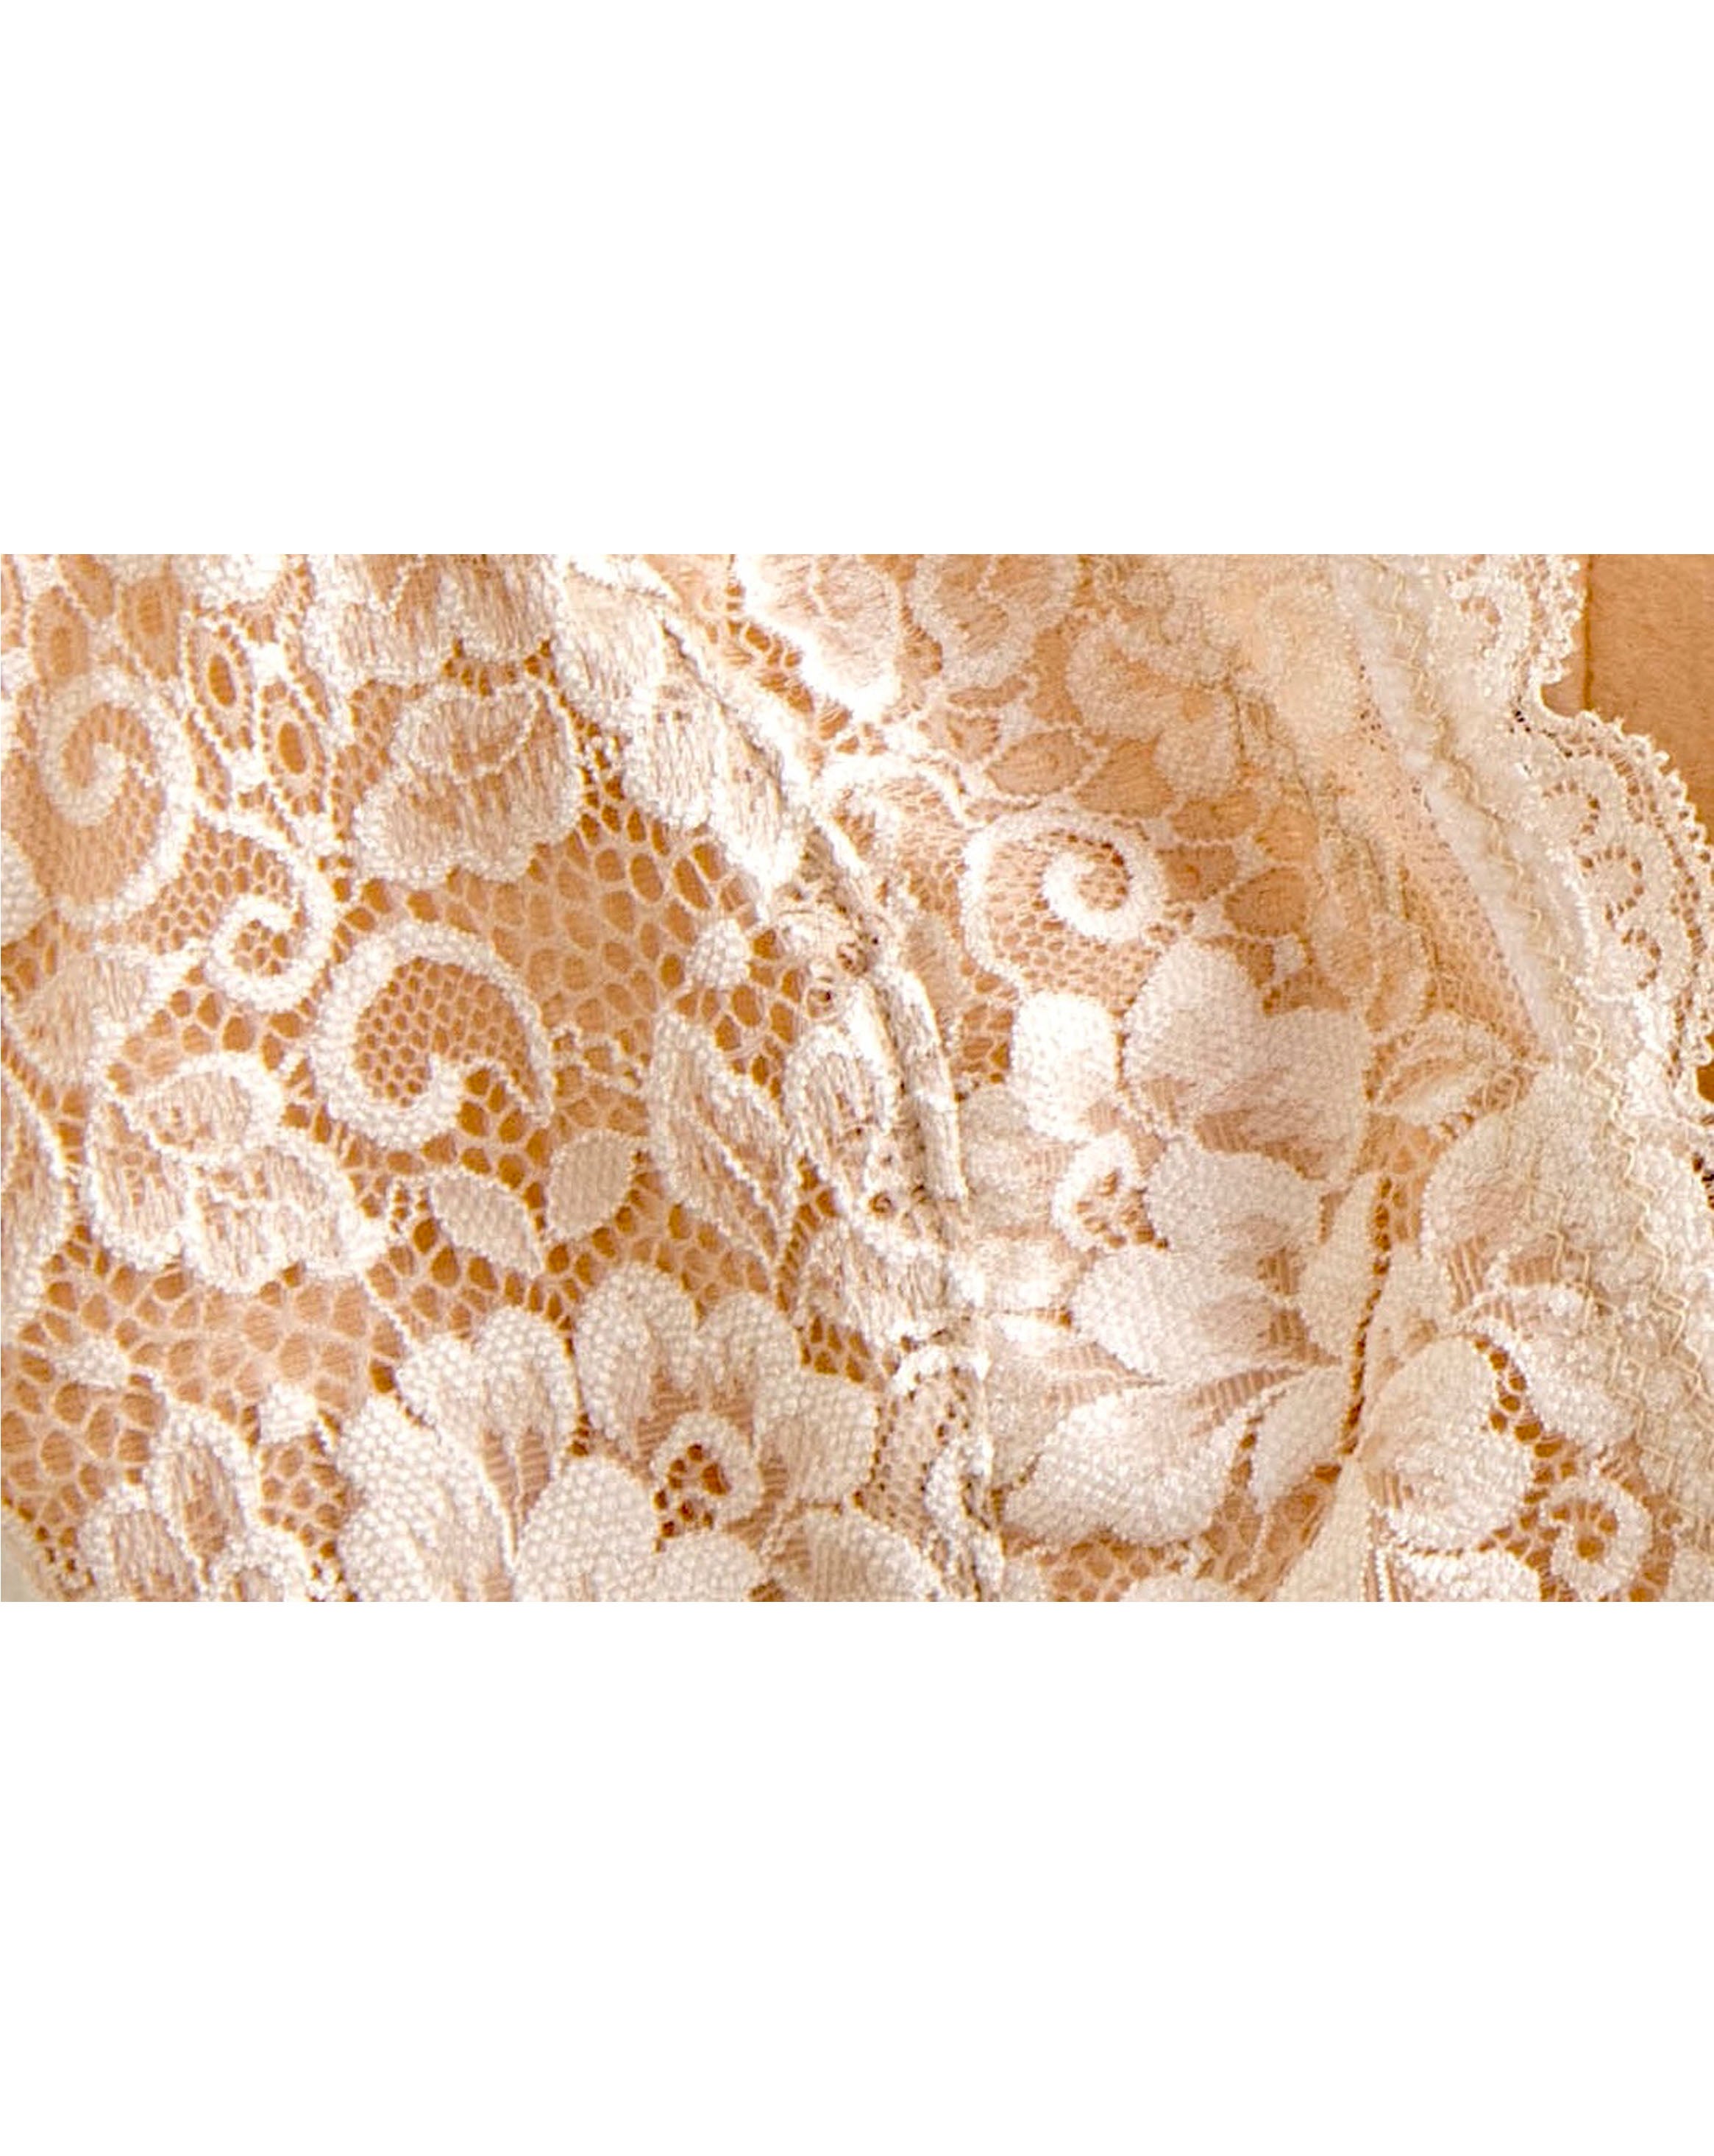 Close up of Rubies Bras beige lace.